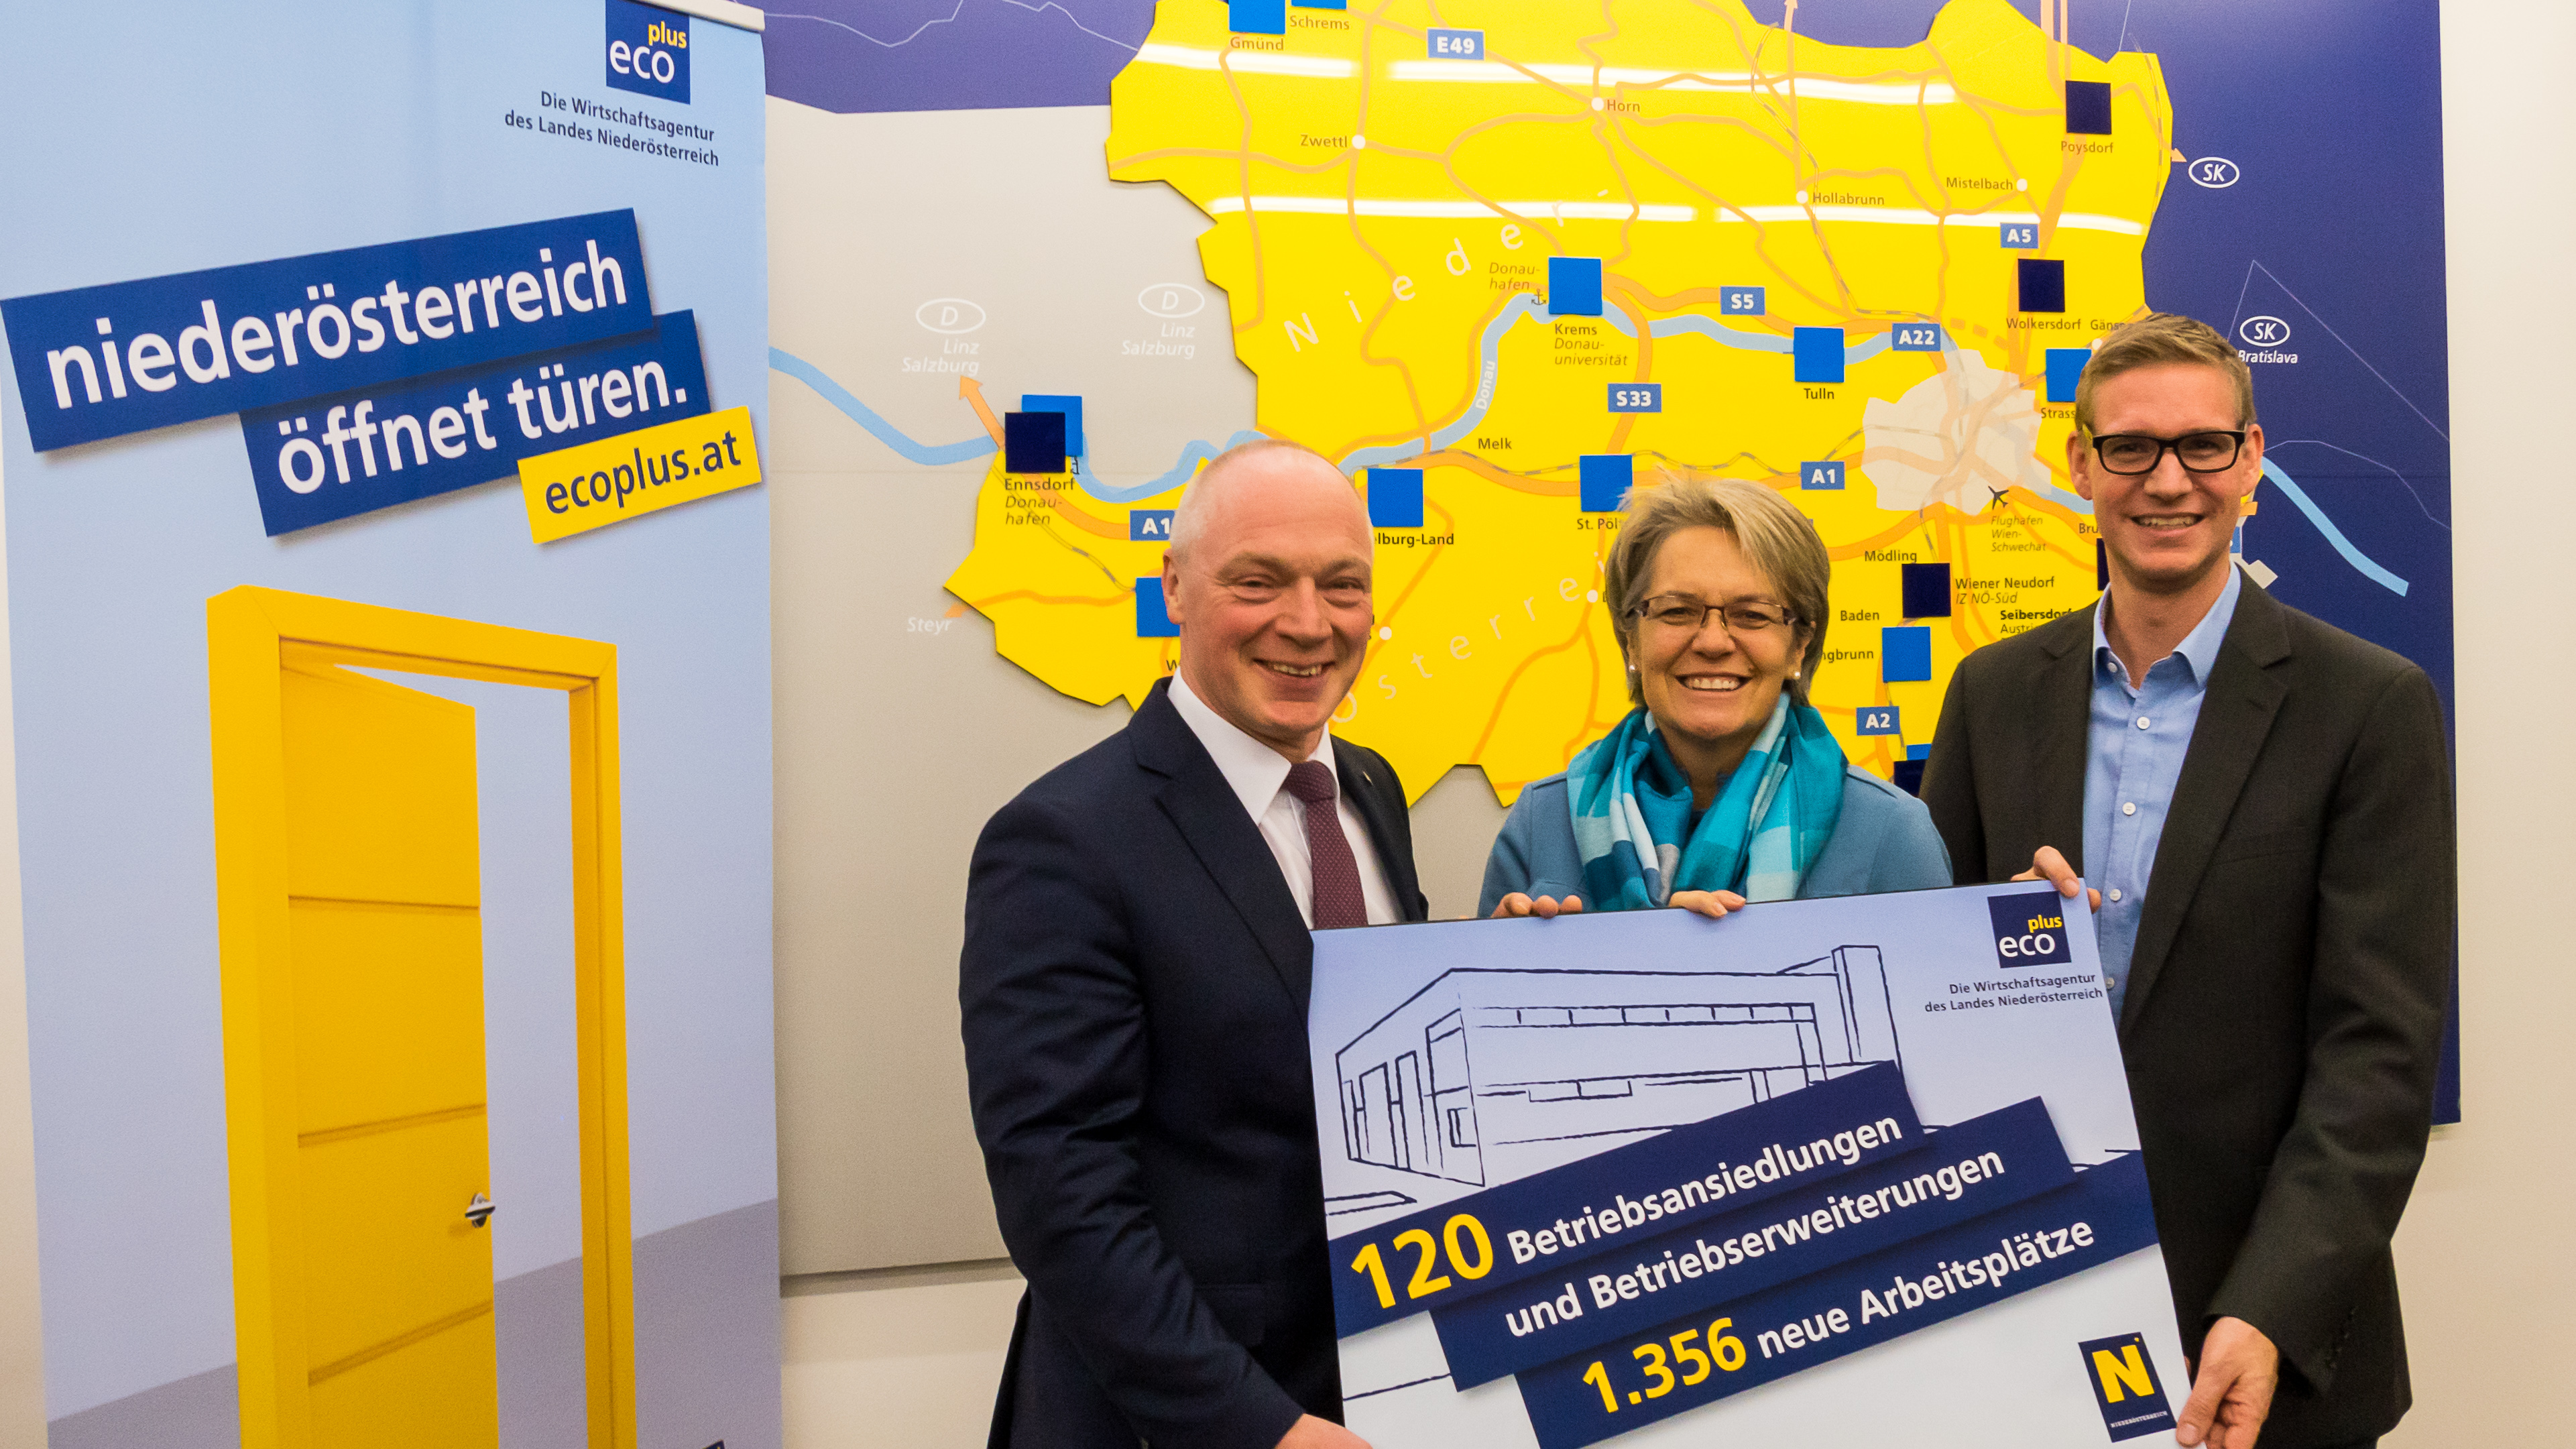 Lidl logistics center in Großebersdorf outshines everything